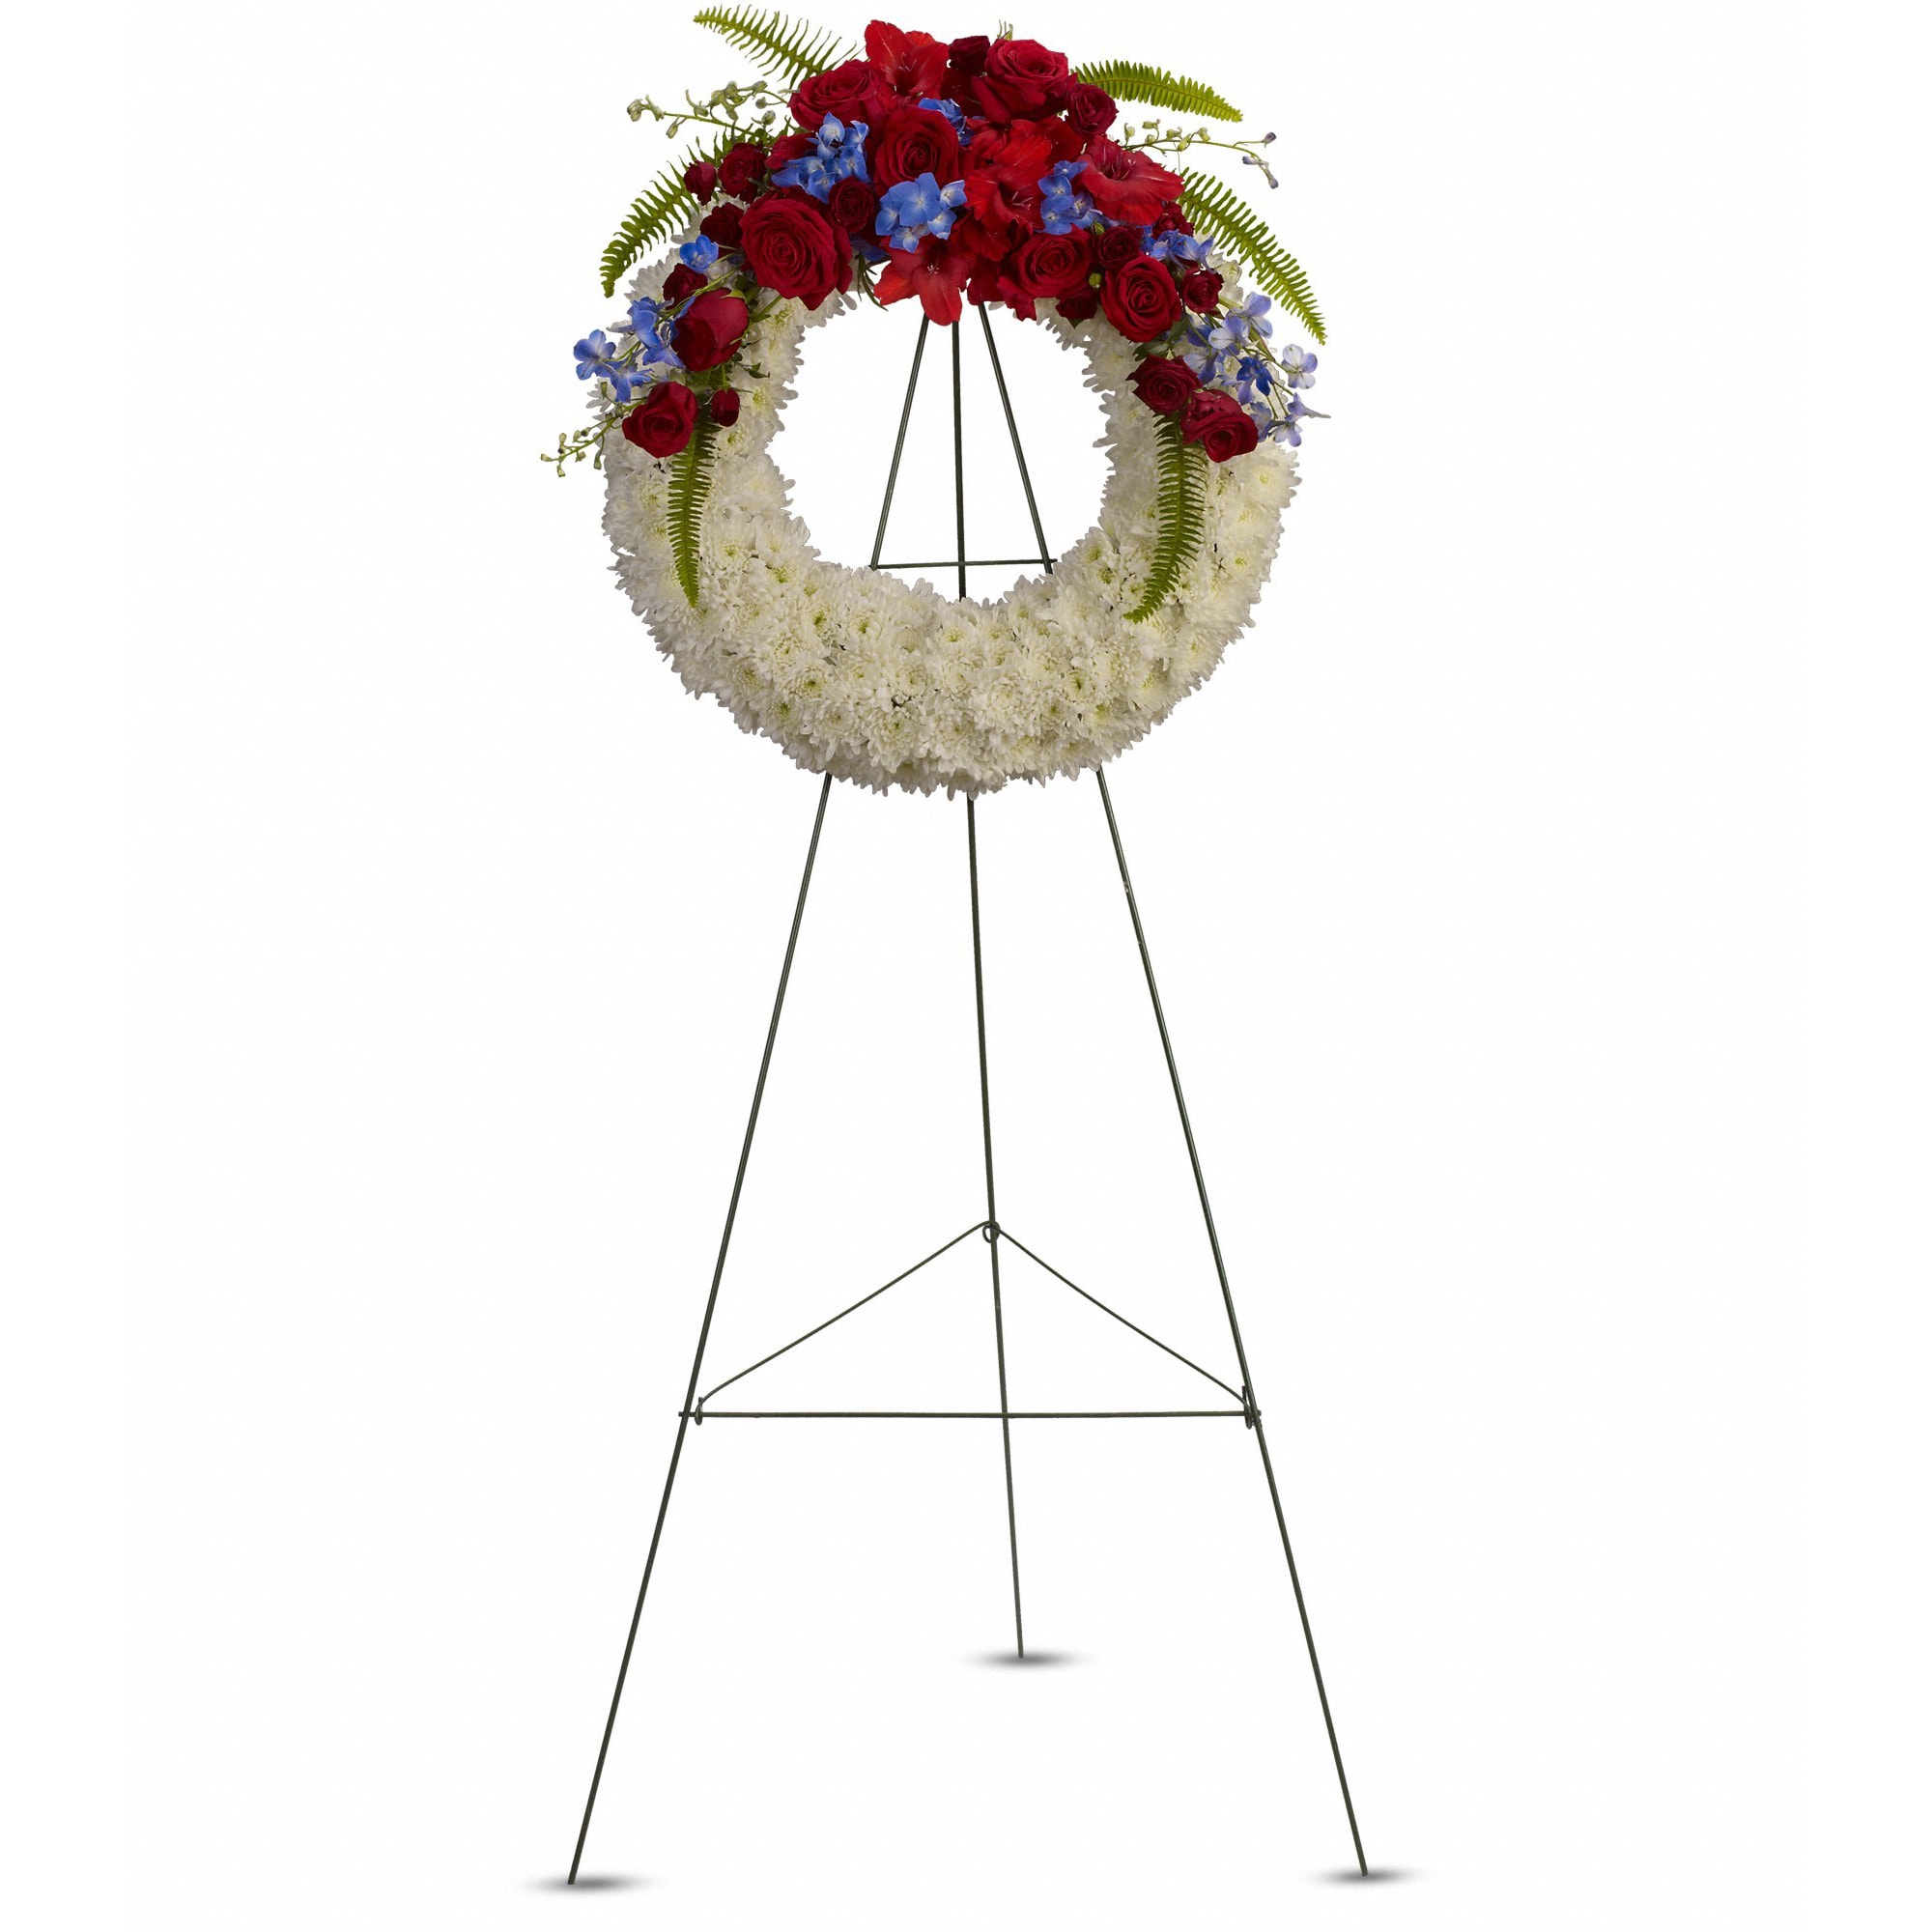 Reflections of Glory Wreath by Teleflora - A stunning display of patriotism, strength and sympathy. This red, white and blue wreath delivers a lovely message about the dignity of the deceased. 